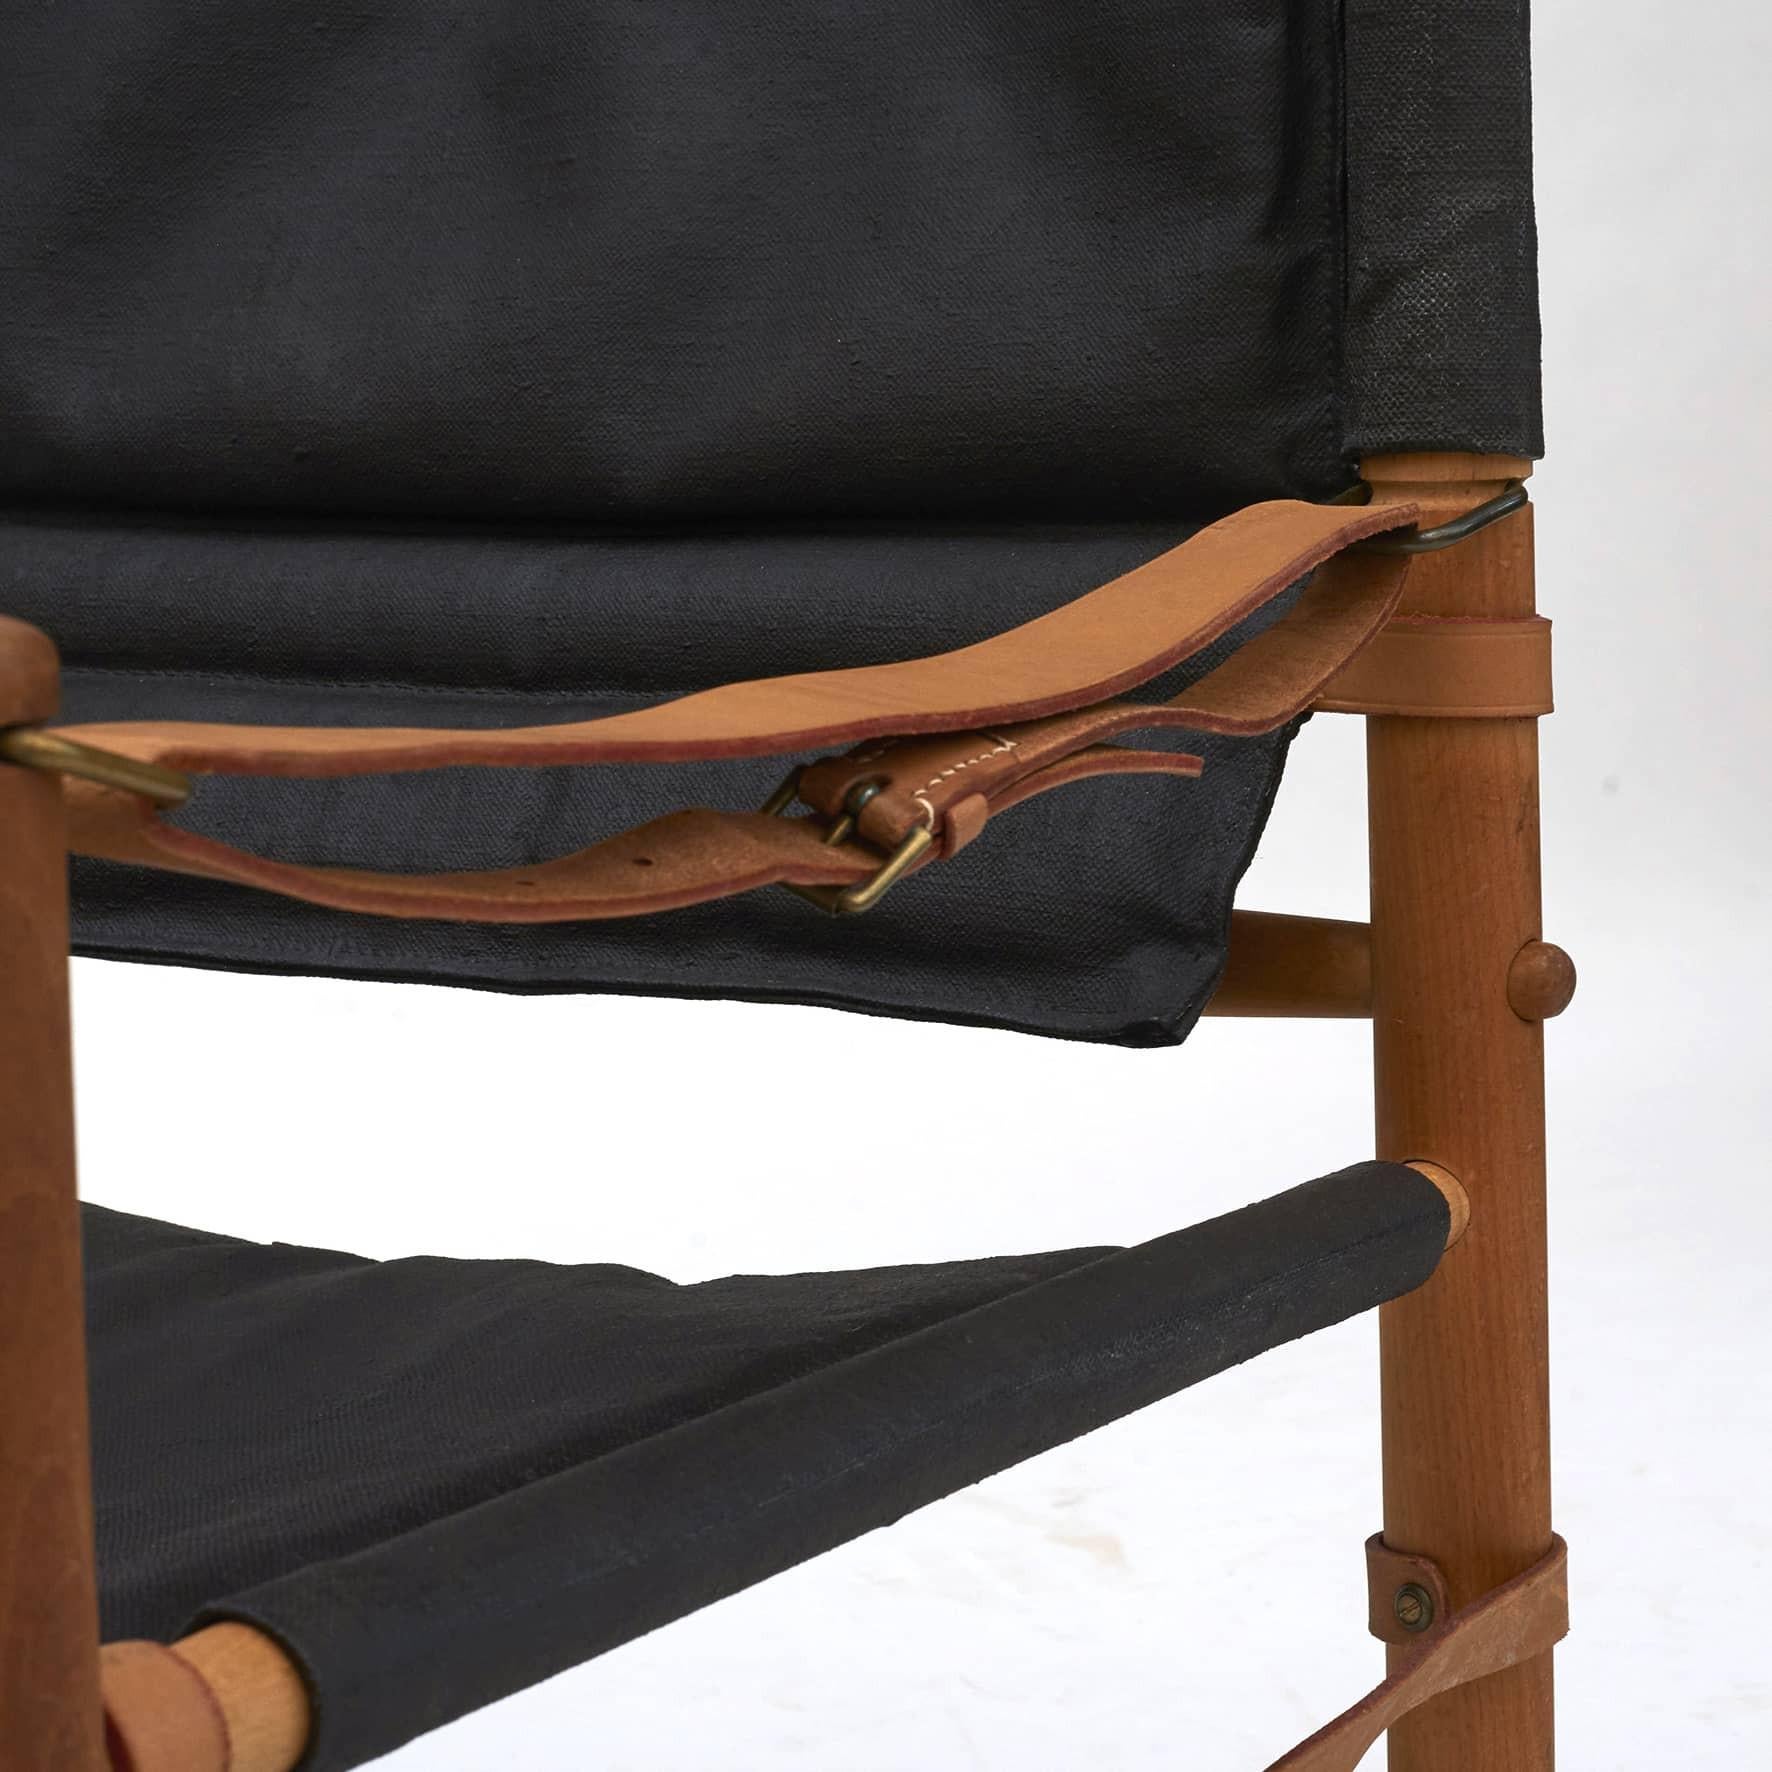 Leather Pair of Axel Thygesen Oasis Safari Chairs for Interna, Denmark, 1960's For Sale